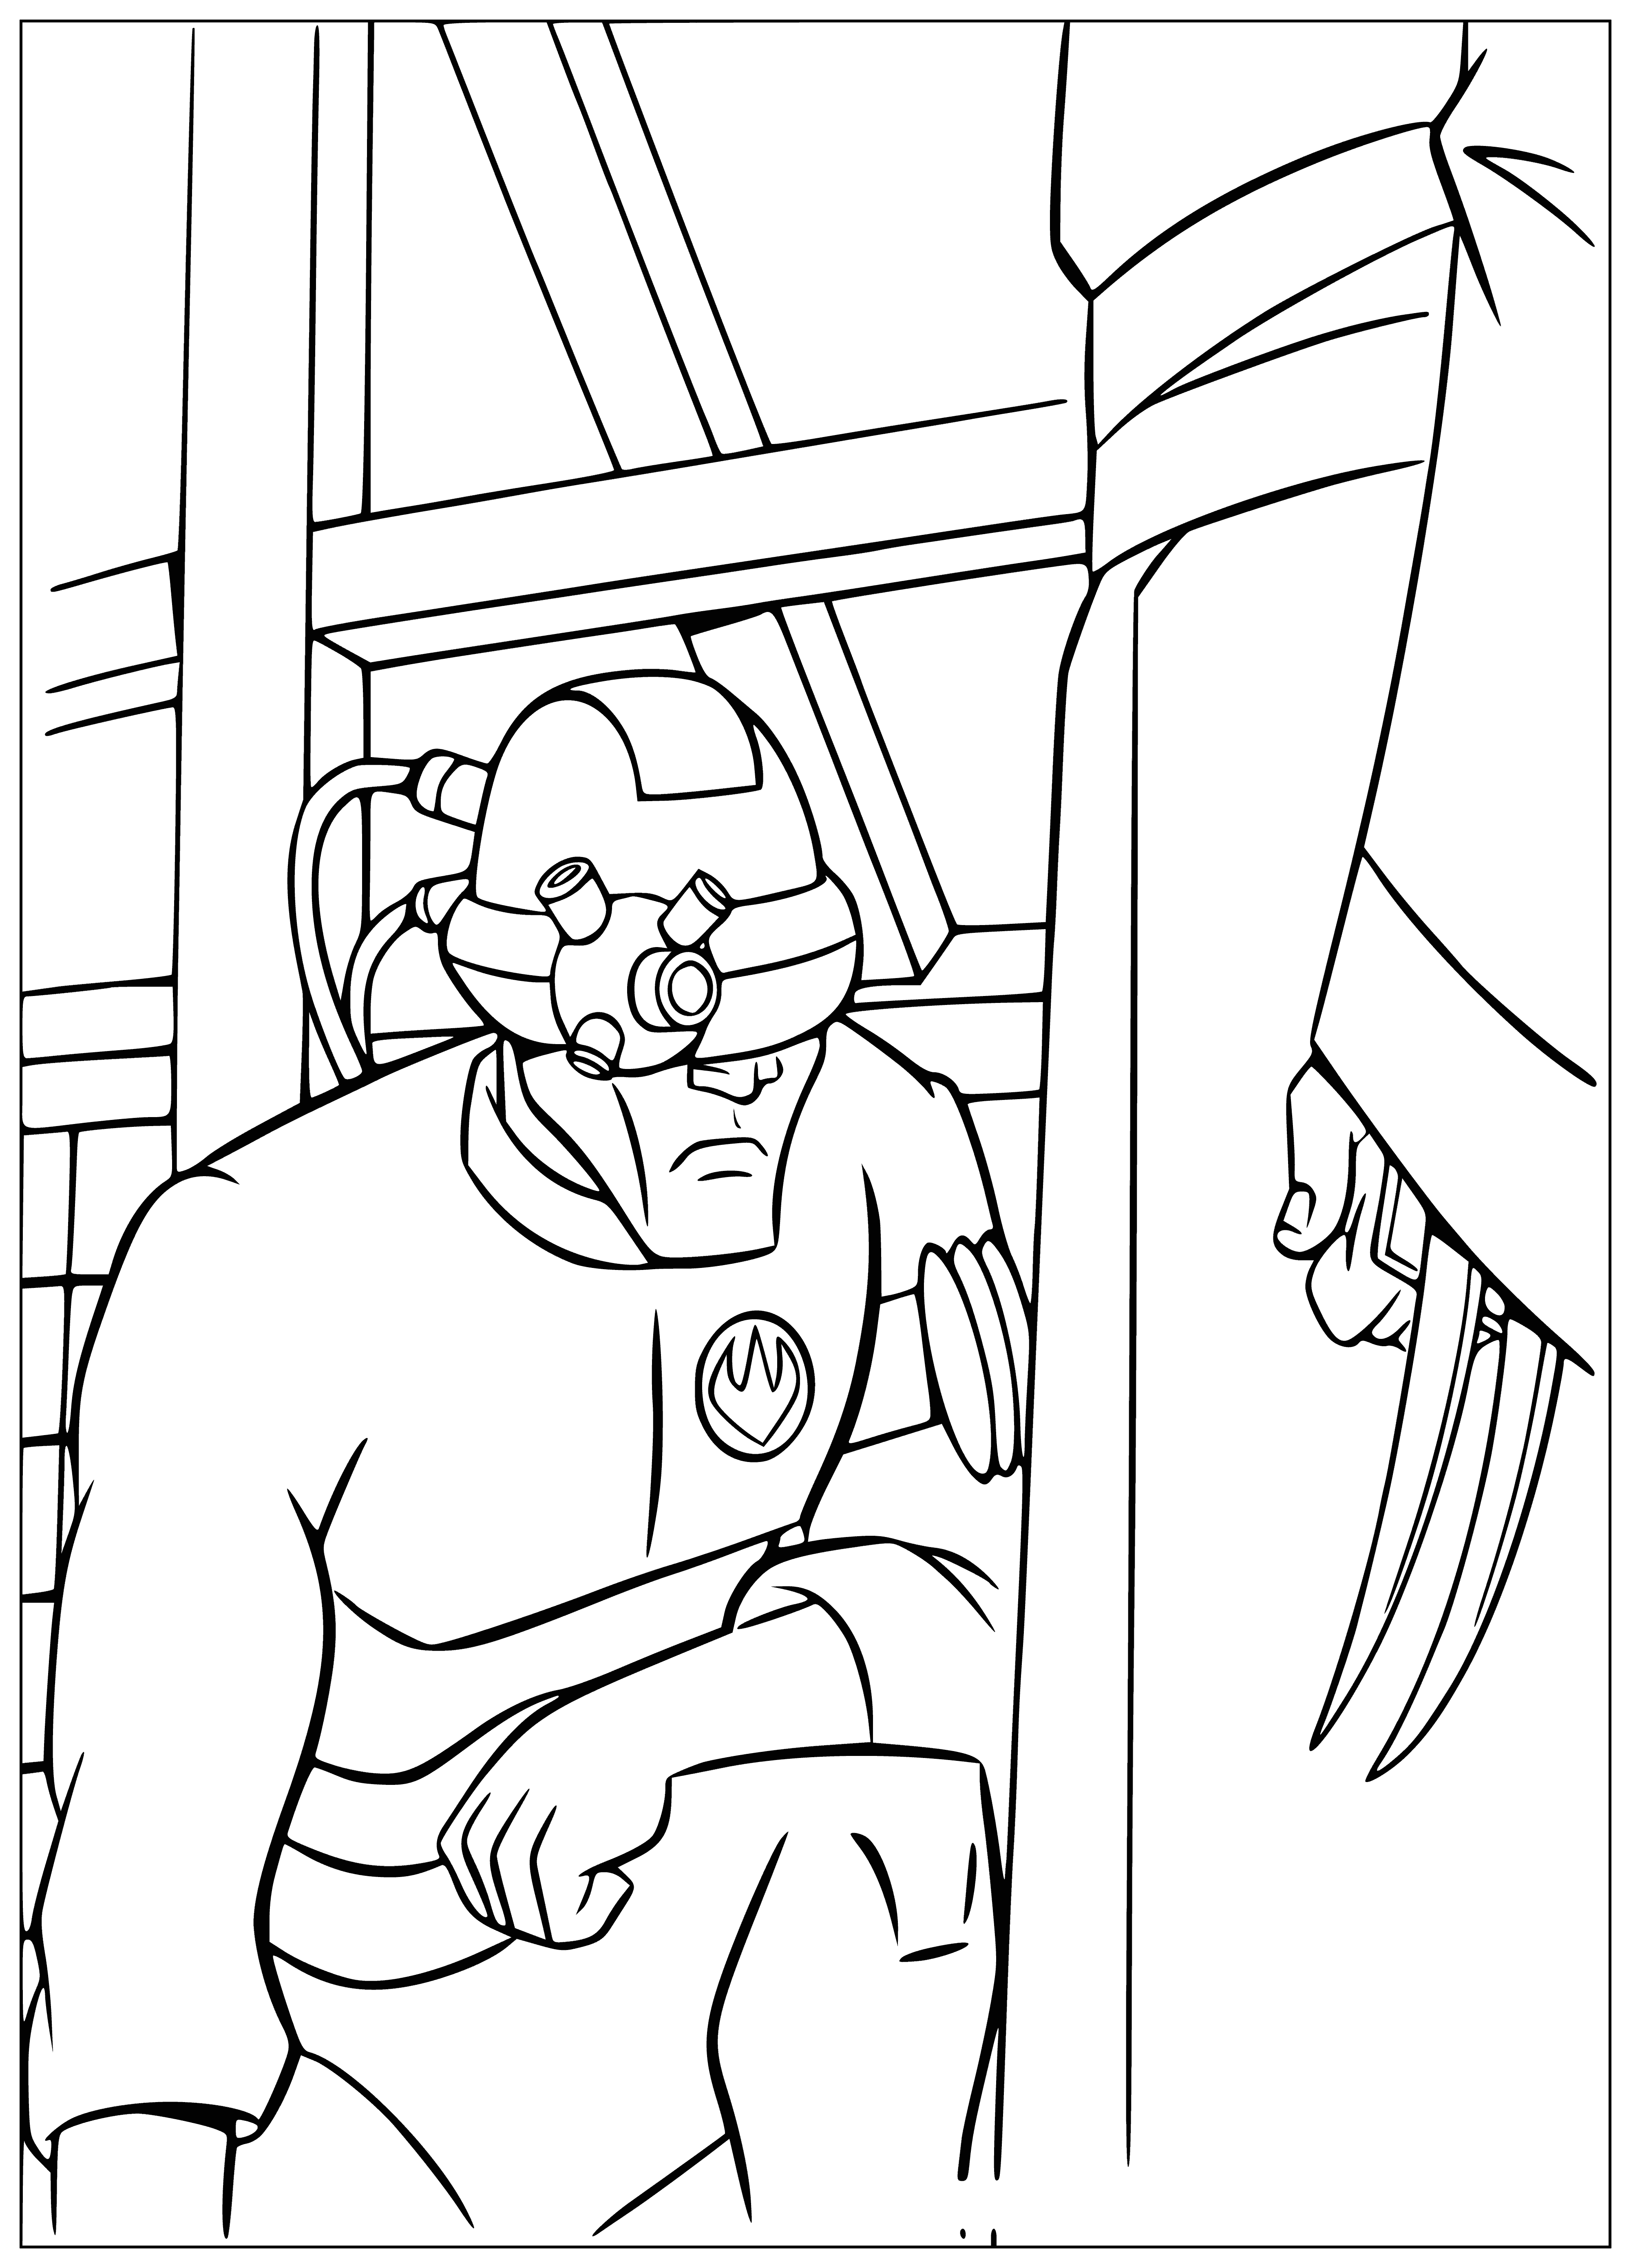 Schroeder and cyborg coloring page